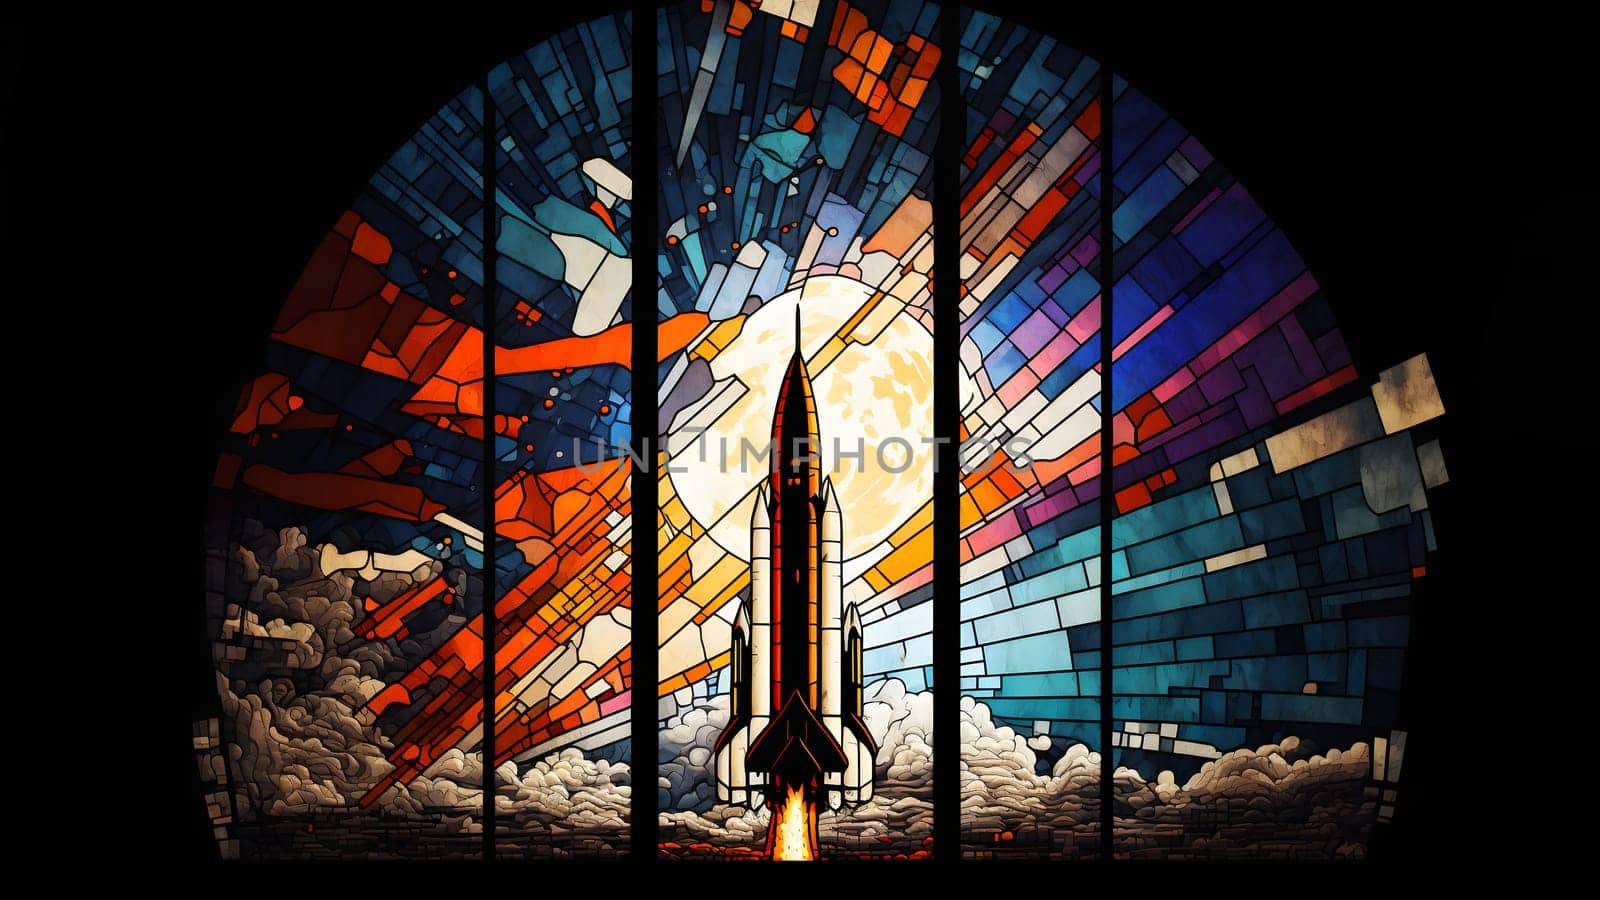 rocket launch, center composition, style of stained glass, neural network generated art. Digitally generated image. Not based on any actual person, scene or pattern.